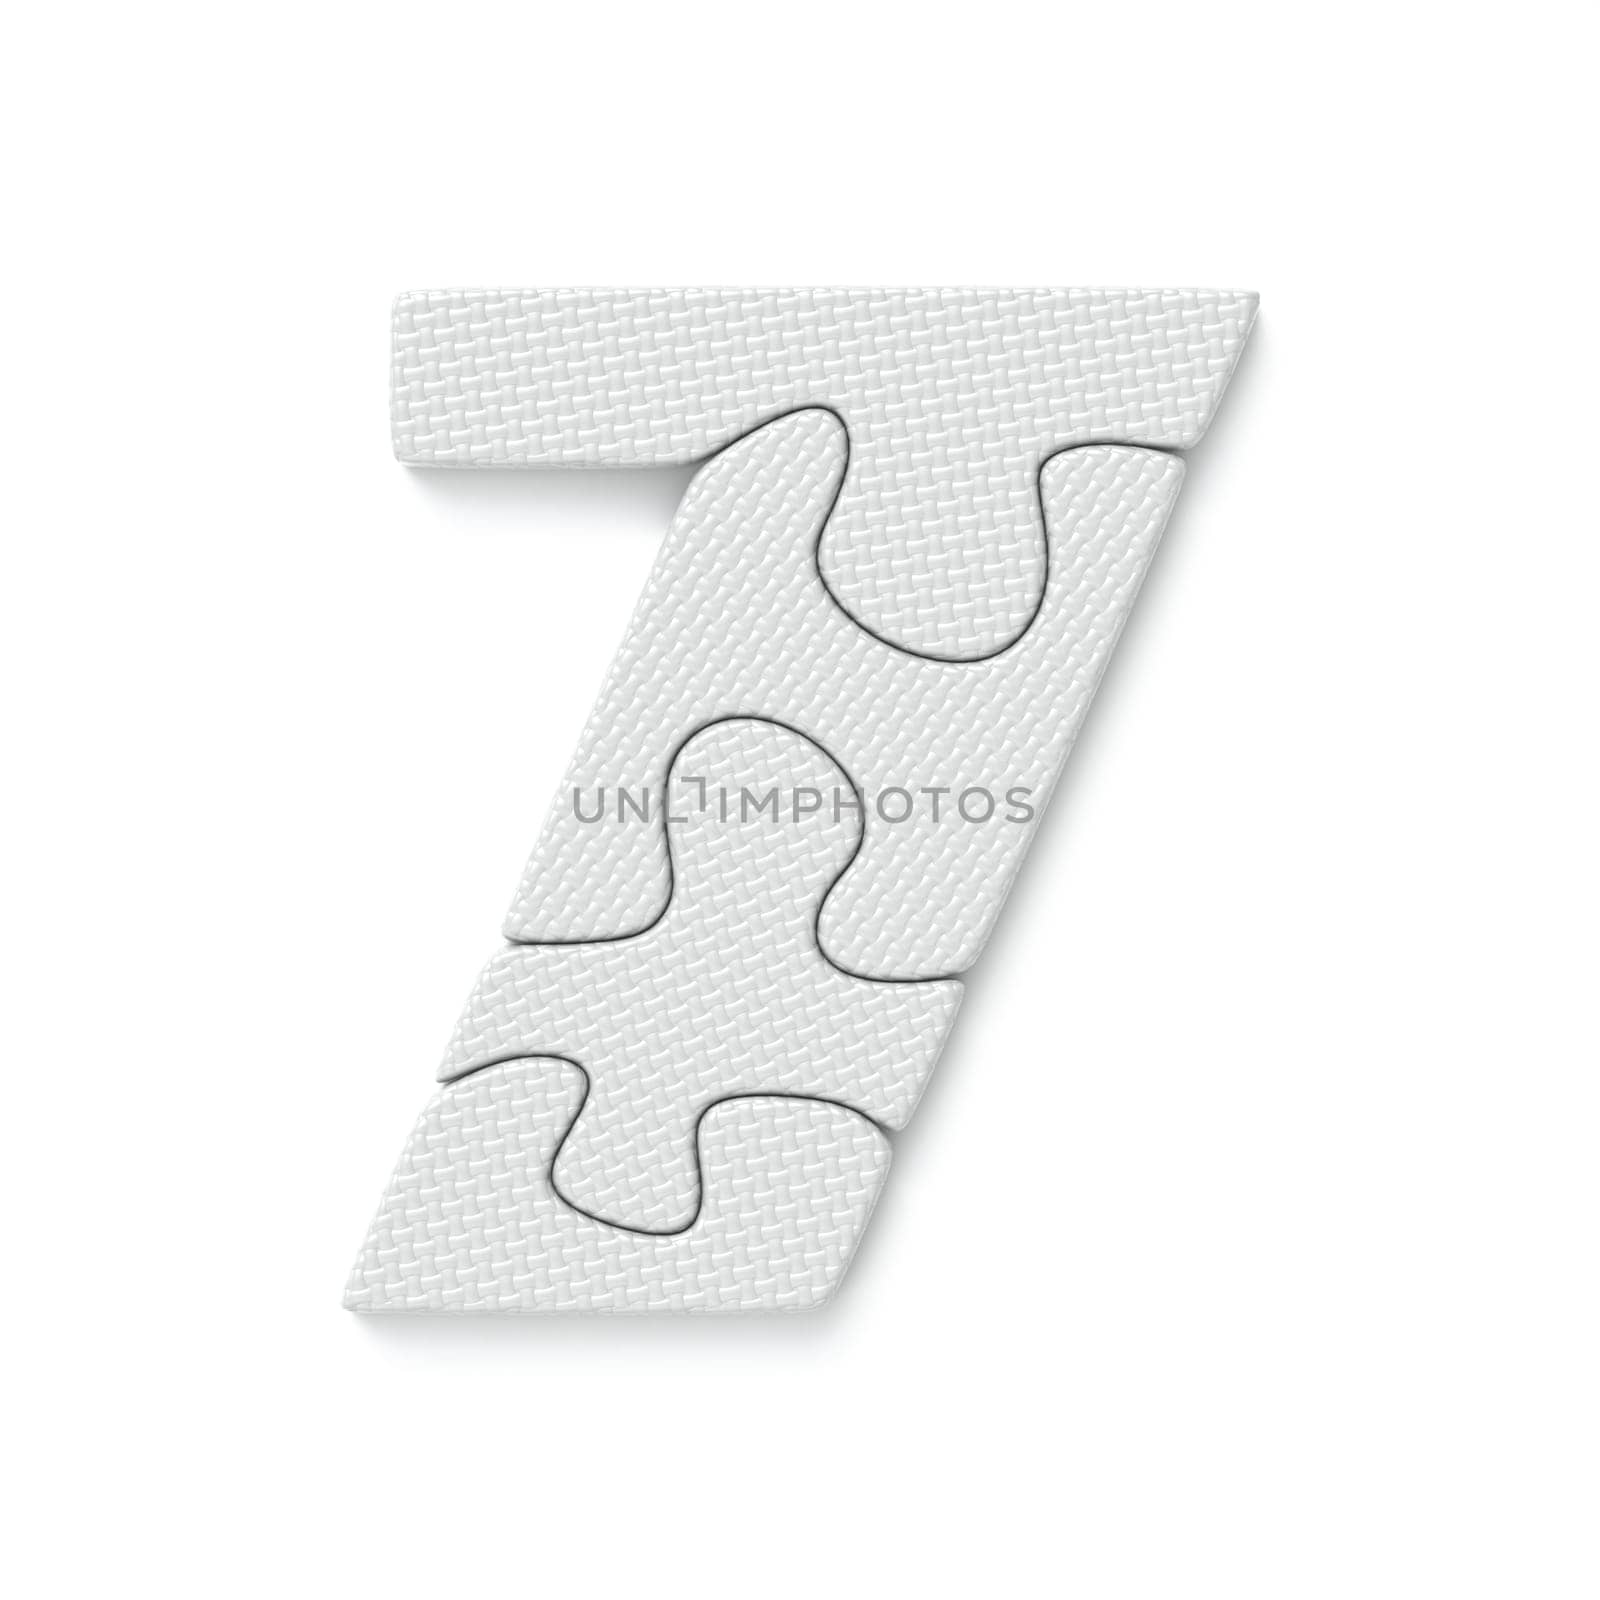 White jigsaw puzzle font Number 7 SEVEN 3D rendering illustration isolated on white background